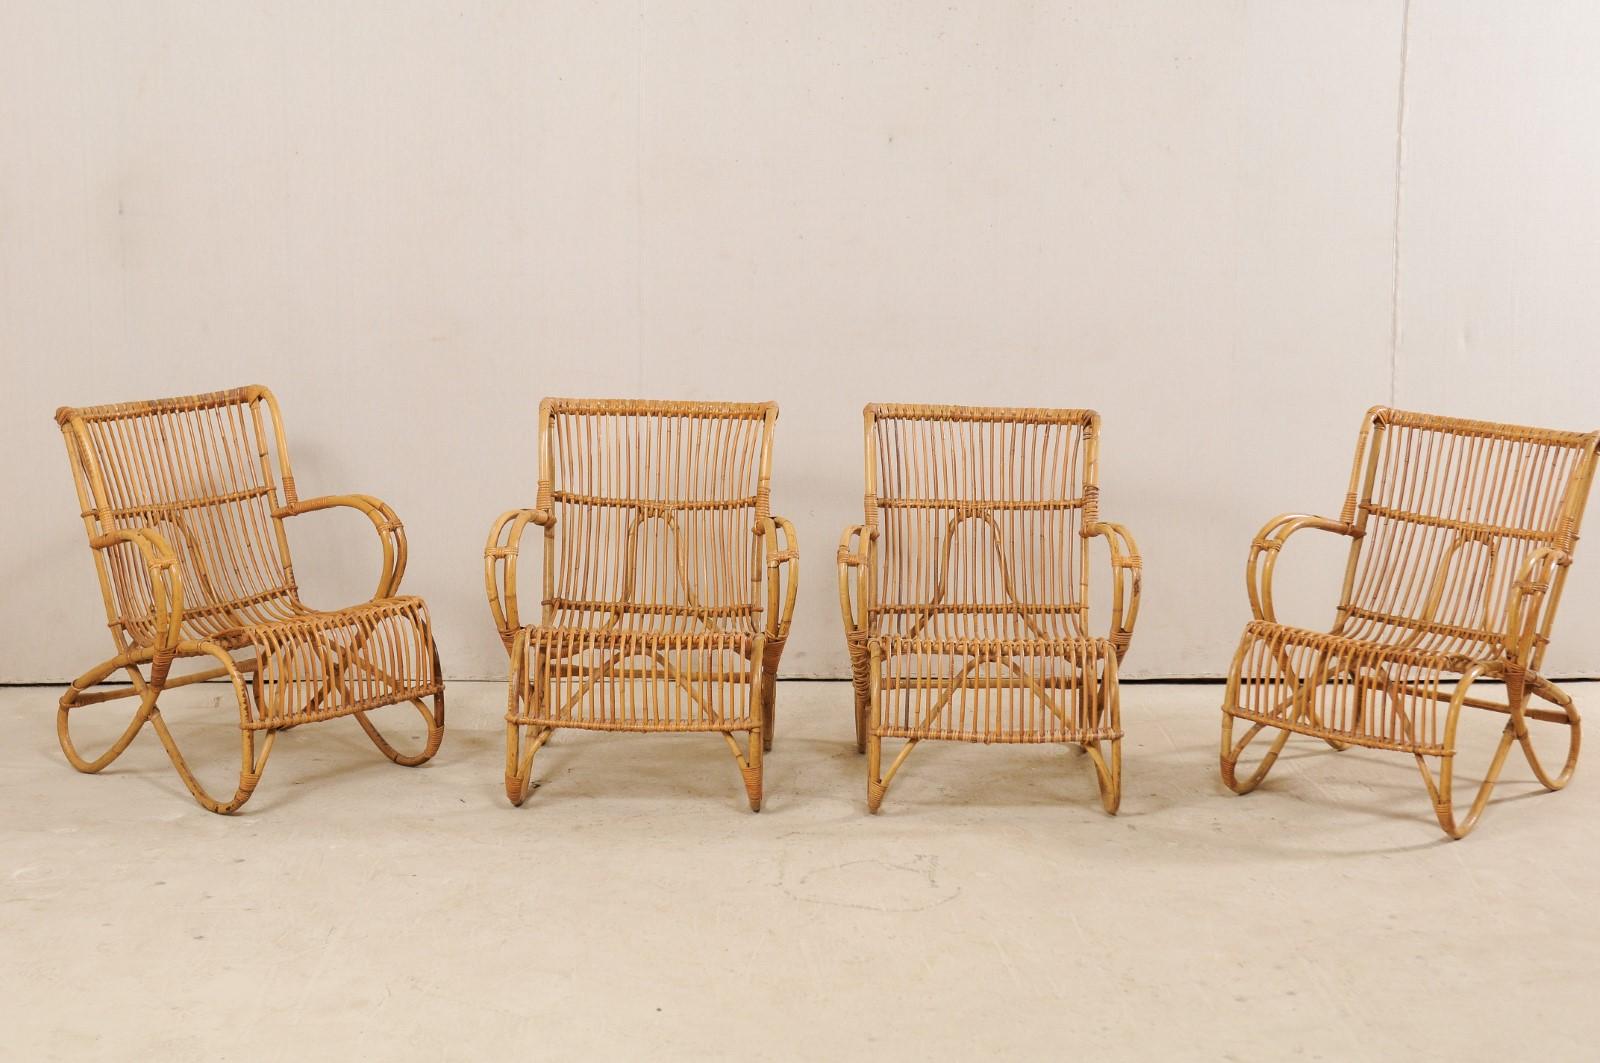 A set of French vintage cane patio chairs. This set of four chairs from France feature a curvaceous and airy design with casual comfort in mind. The chairs are constructed of cane, which has been bent into shaped into fluid movements throughout the